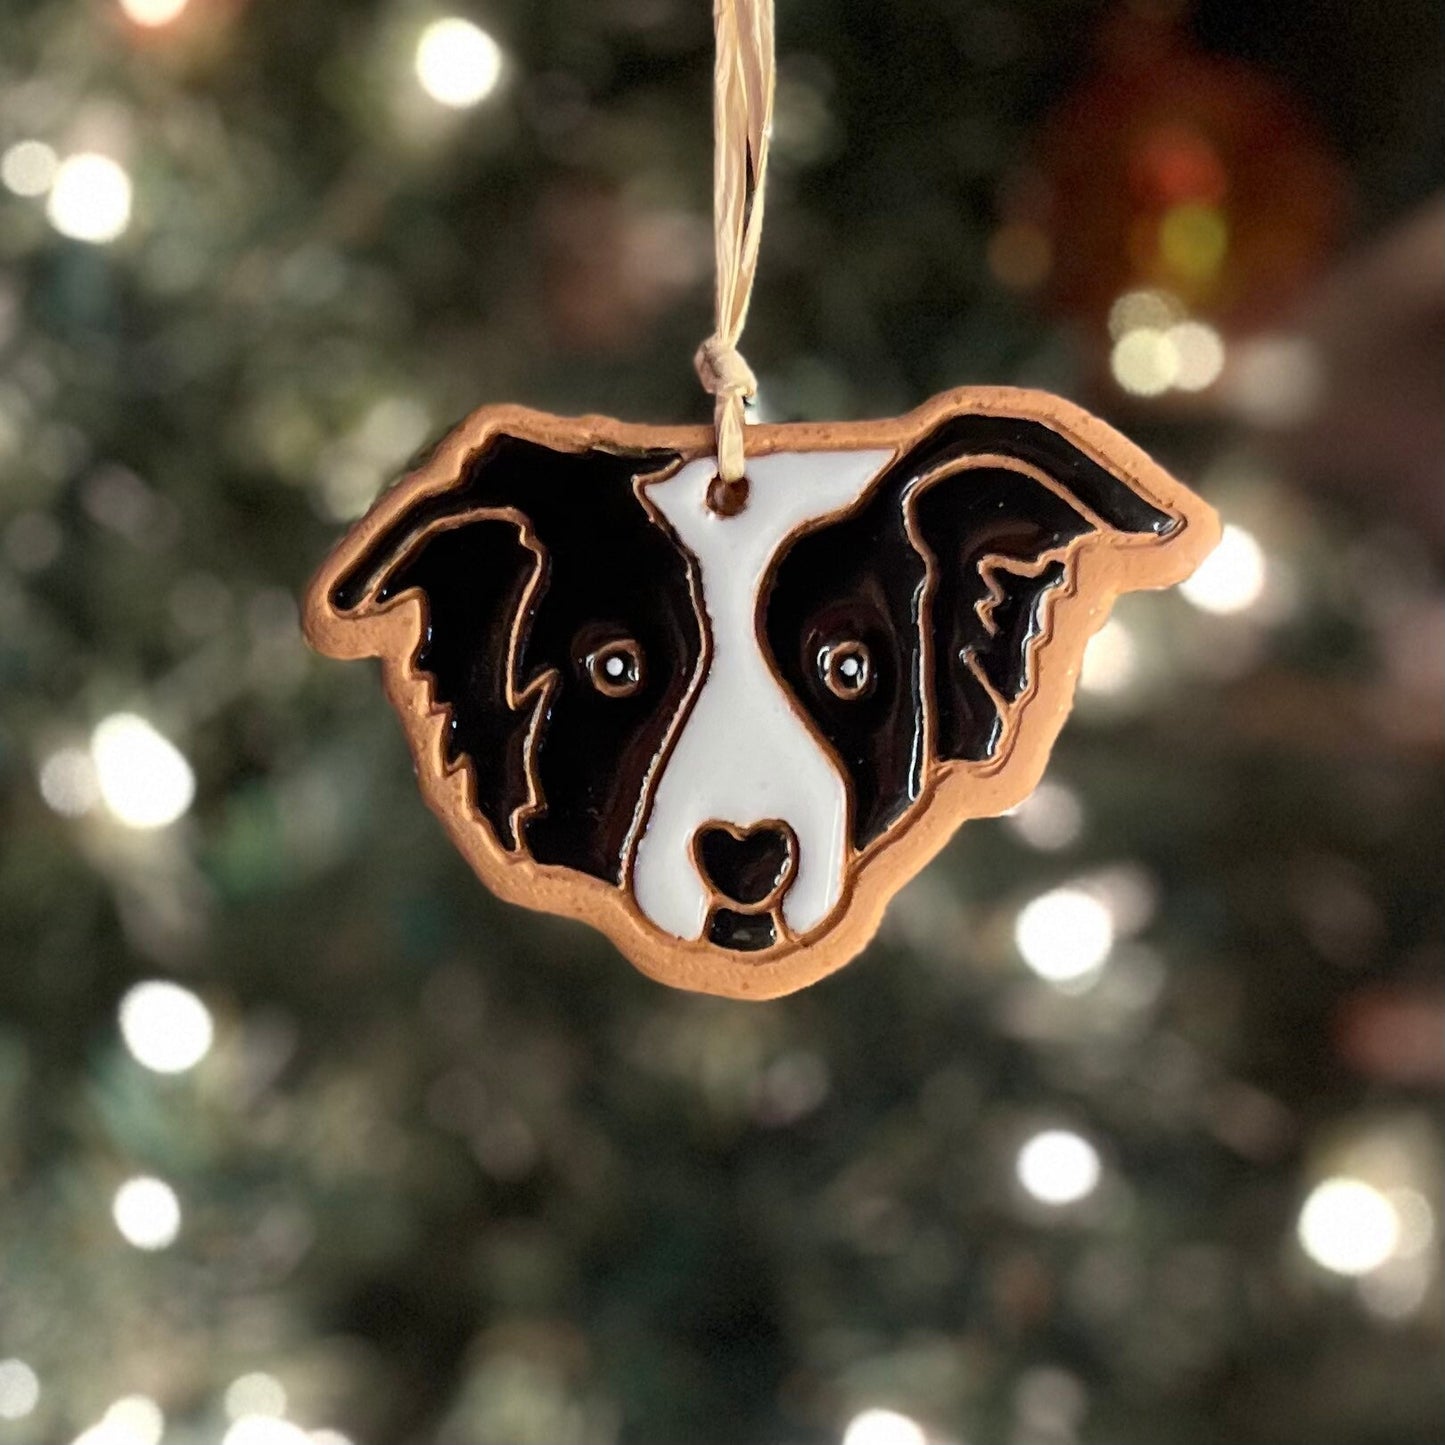 Border Collie Ornament: Local Handmade Hand Painted Ceramic Clay Christmas